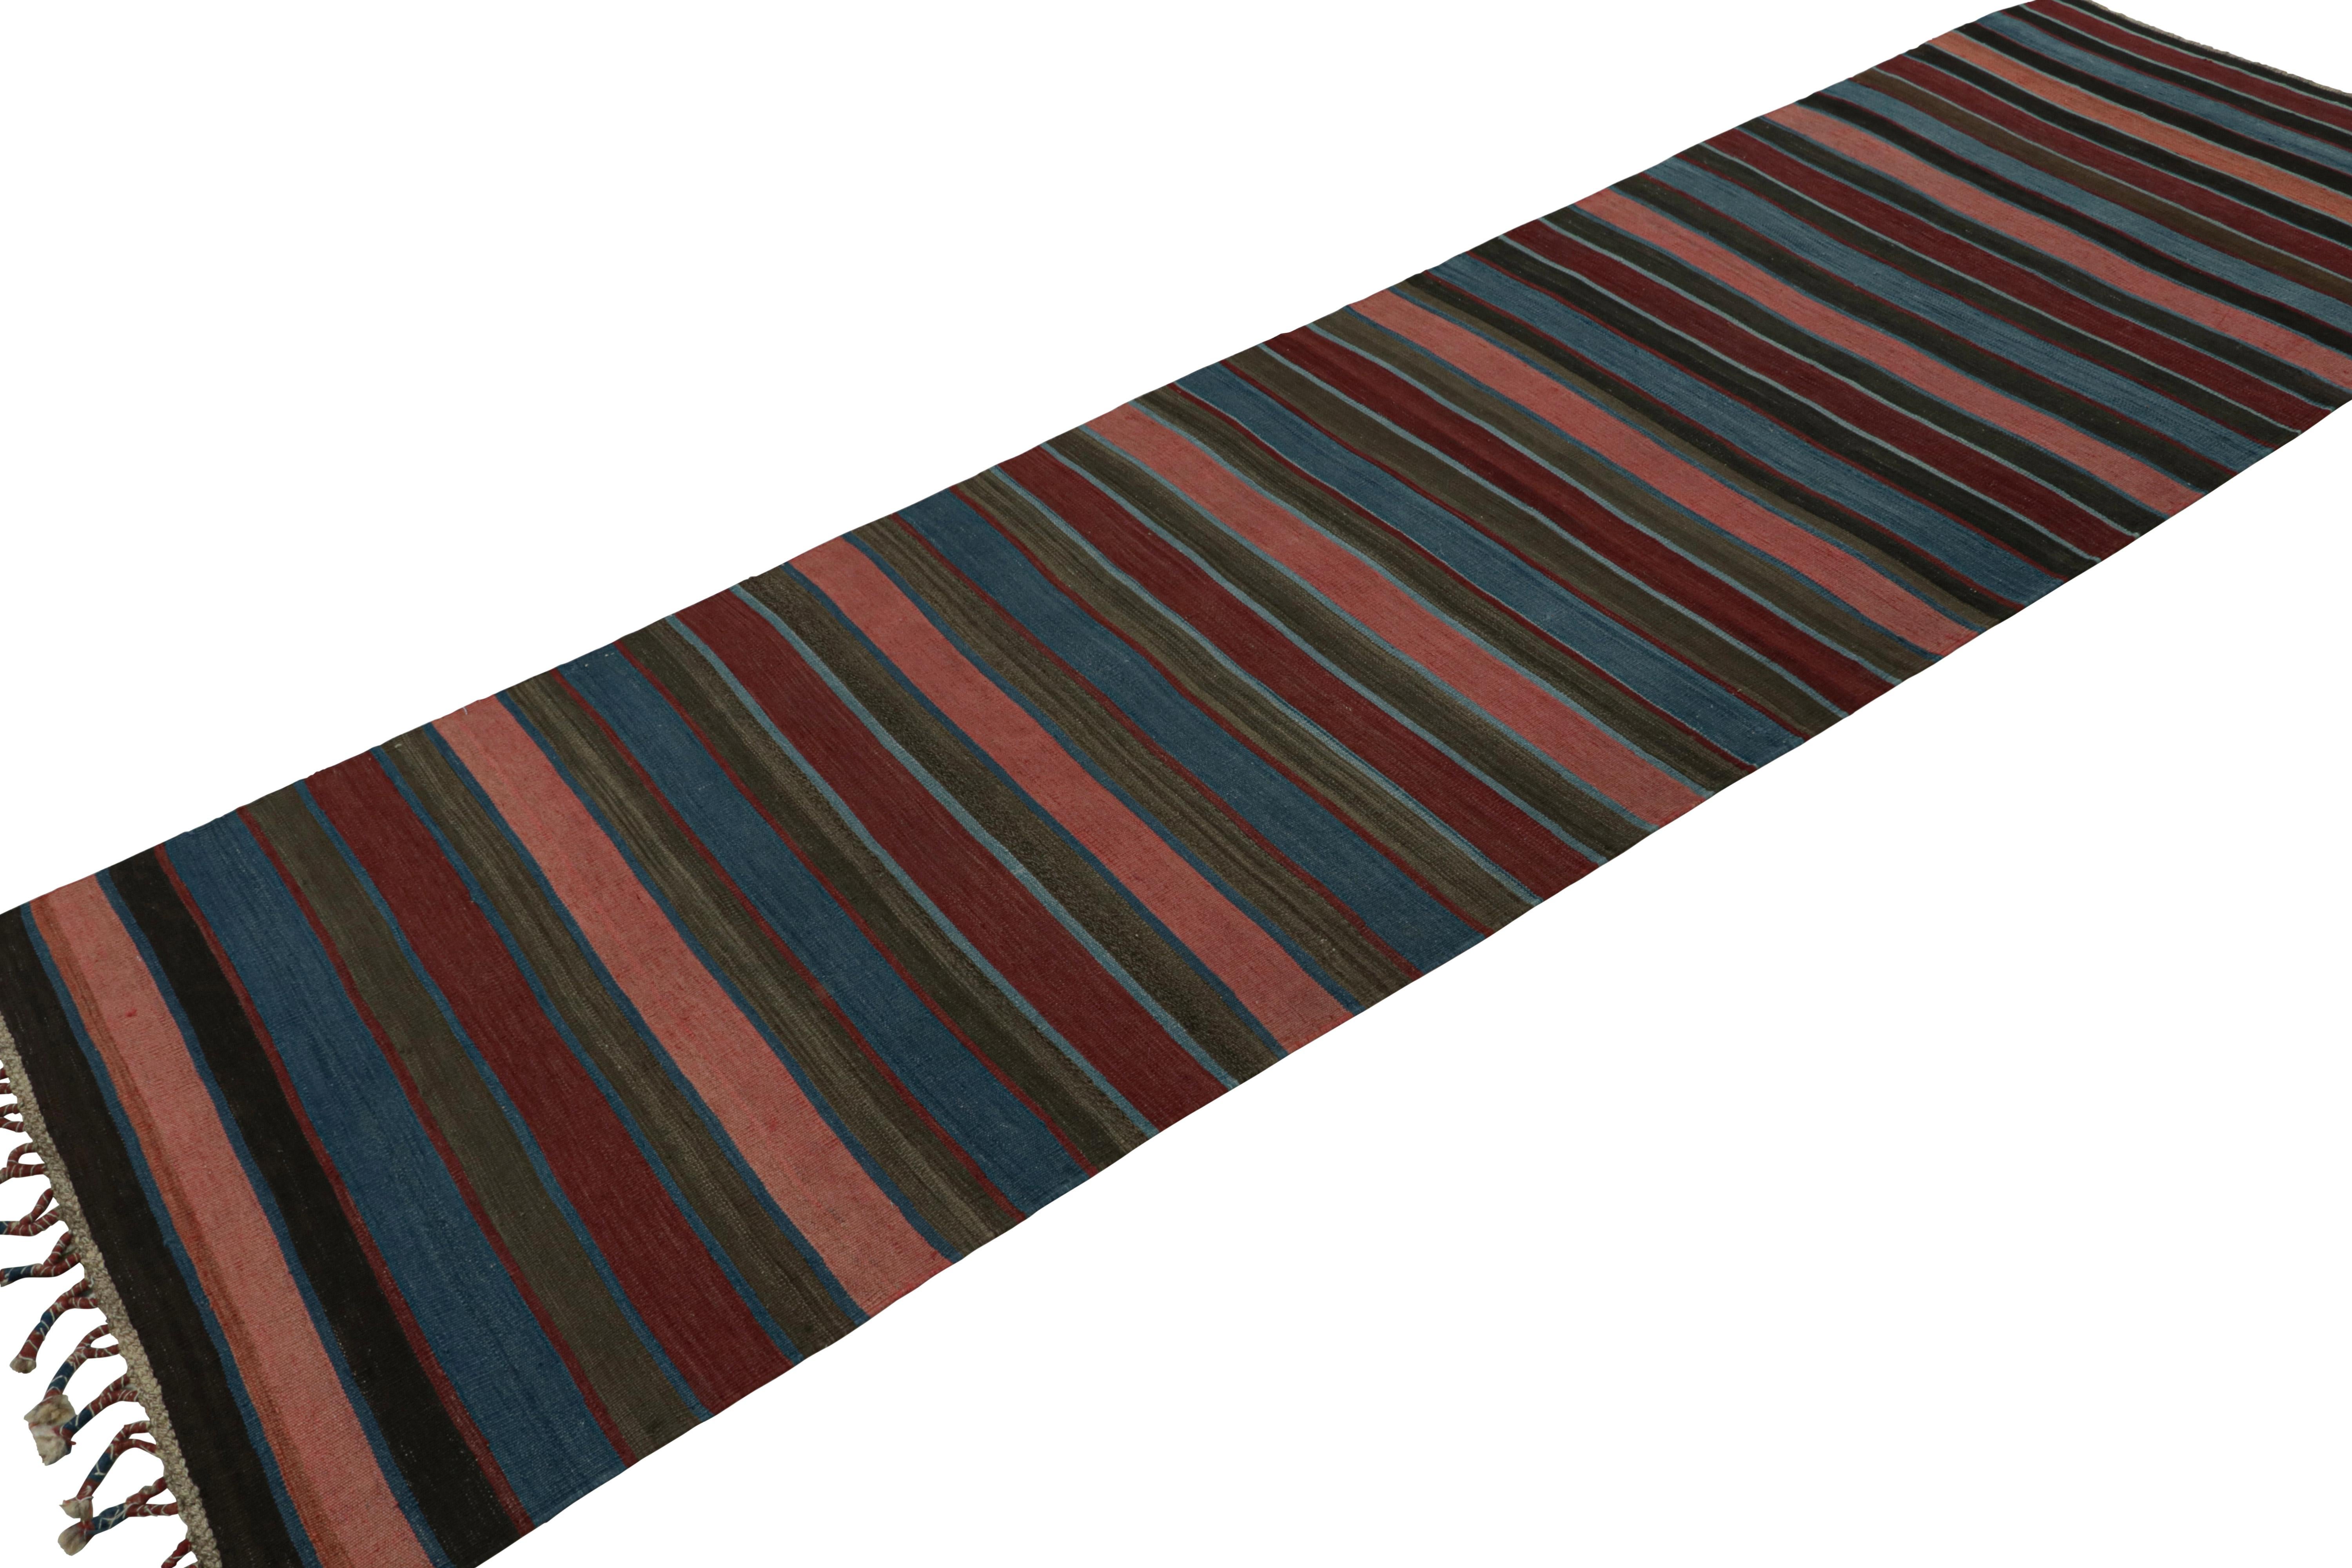 Handwoven in wool, circa 1950-1960, this 3x11 vintage Afghan tribal kilim runner rug, with stripes across its surface, is a classic Afghani design in the Rug & Kilim collection. 

On the design: 

Originating from Afghanistan, this runner rug is a